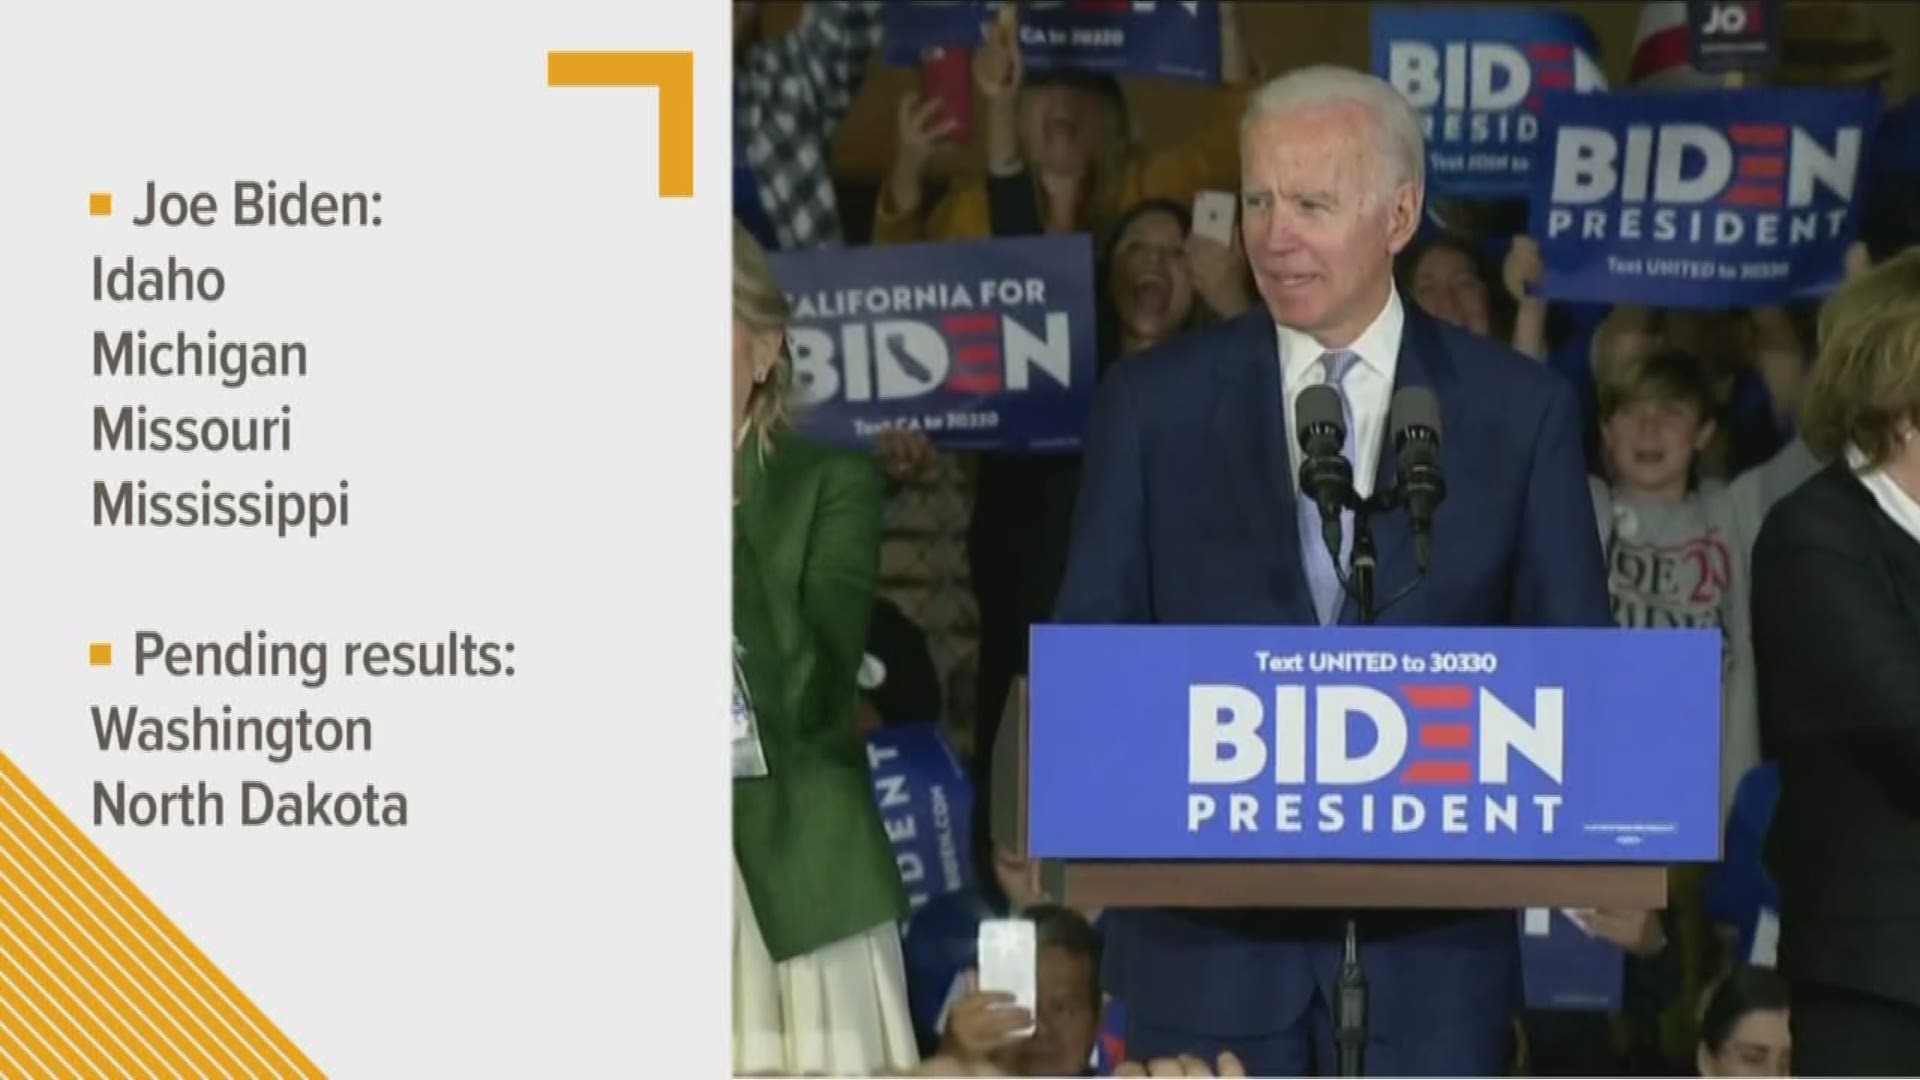 Biden has won Idaho's primary, claiming a seven-point lead over fellow front-runner Bernie Sanders.